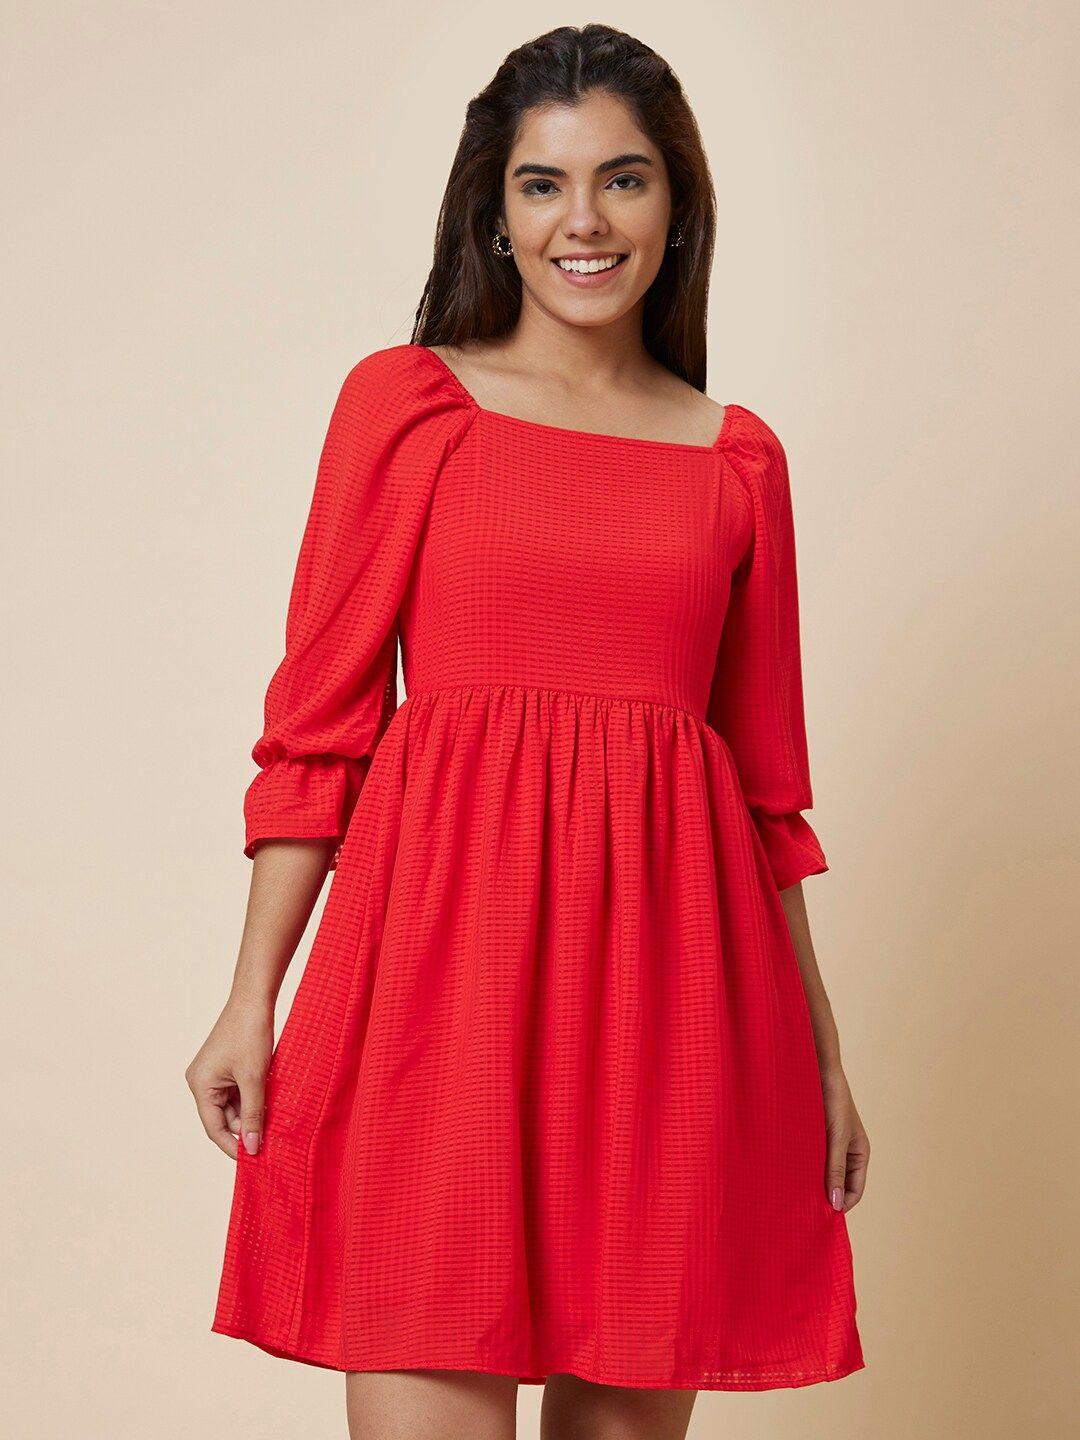 globus-red-puff-sleeve-fit-&-flare-dress